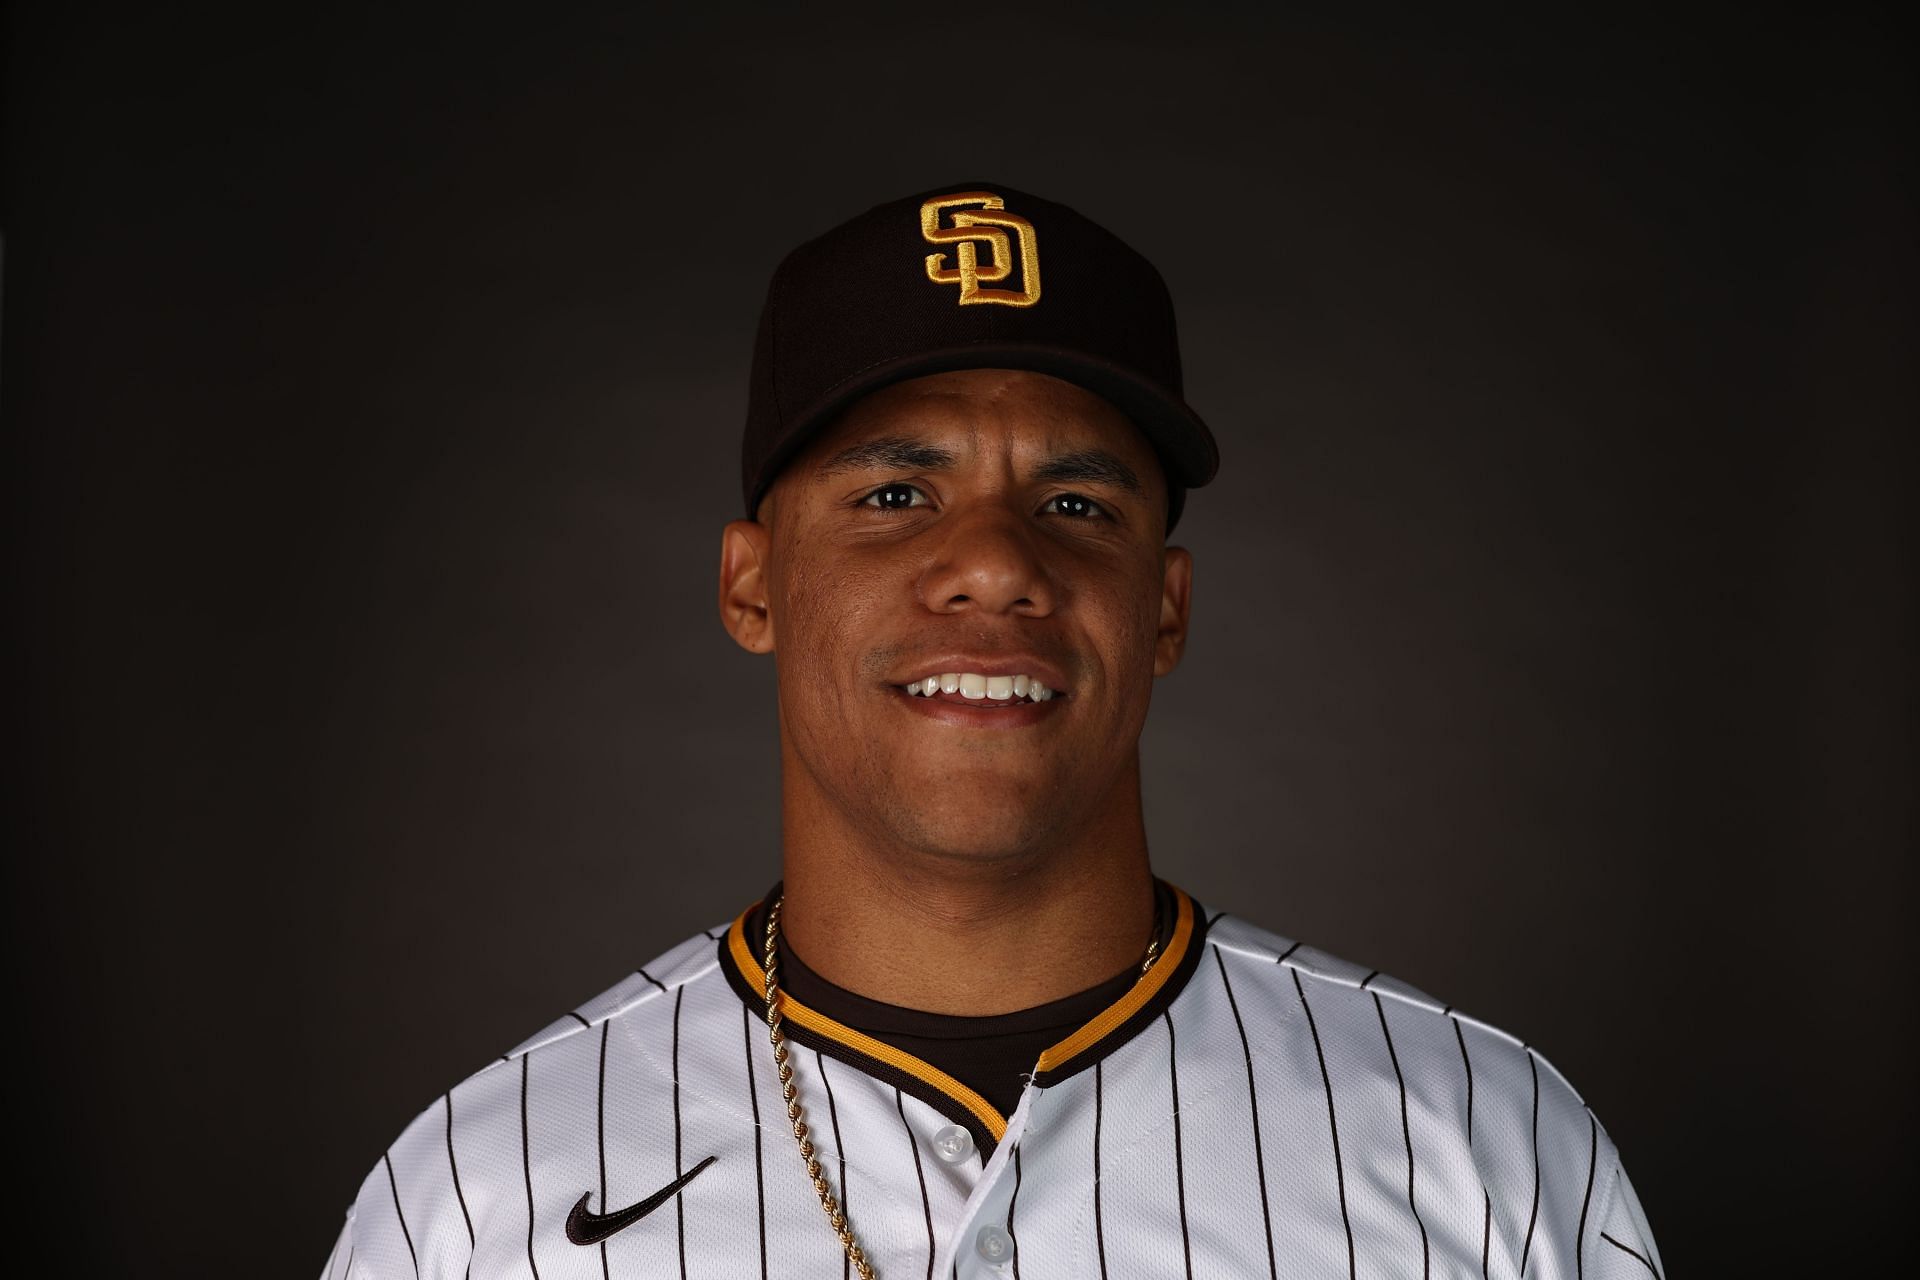 Padres: Juan Soto had most adorable reaction to his perfect bobblehead